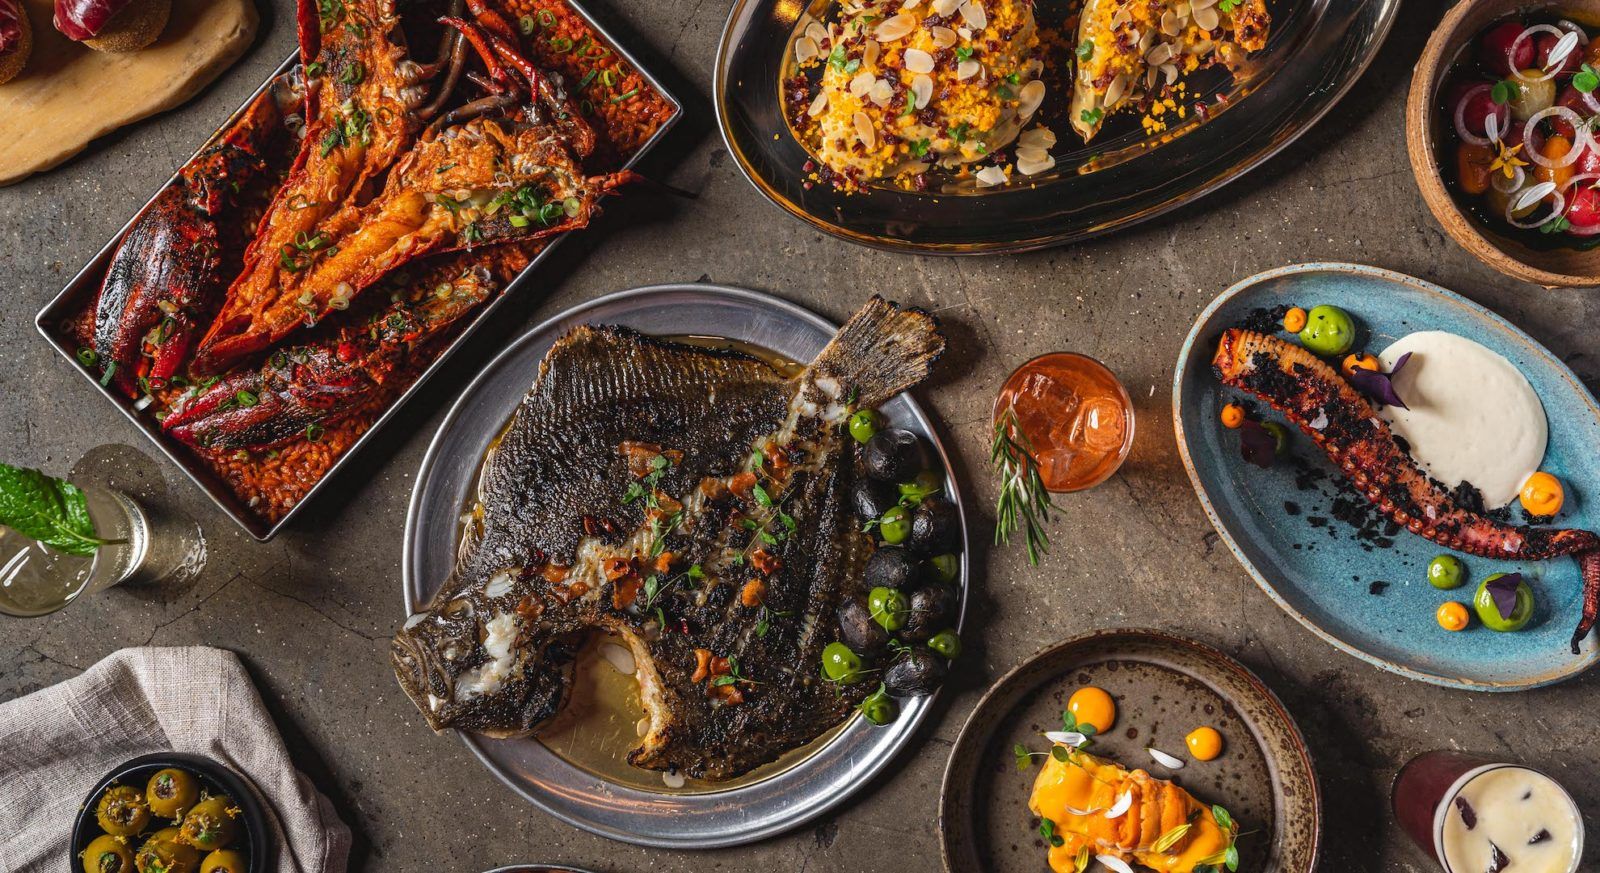 These are the tapas we can’t get enough of at newly-reopened 22 Ships